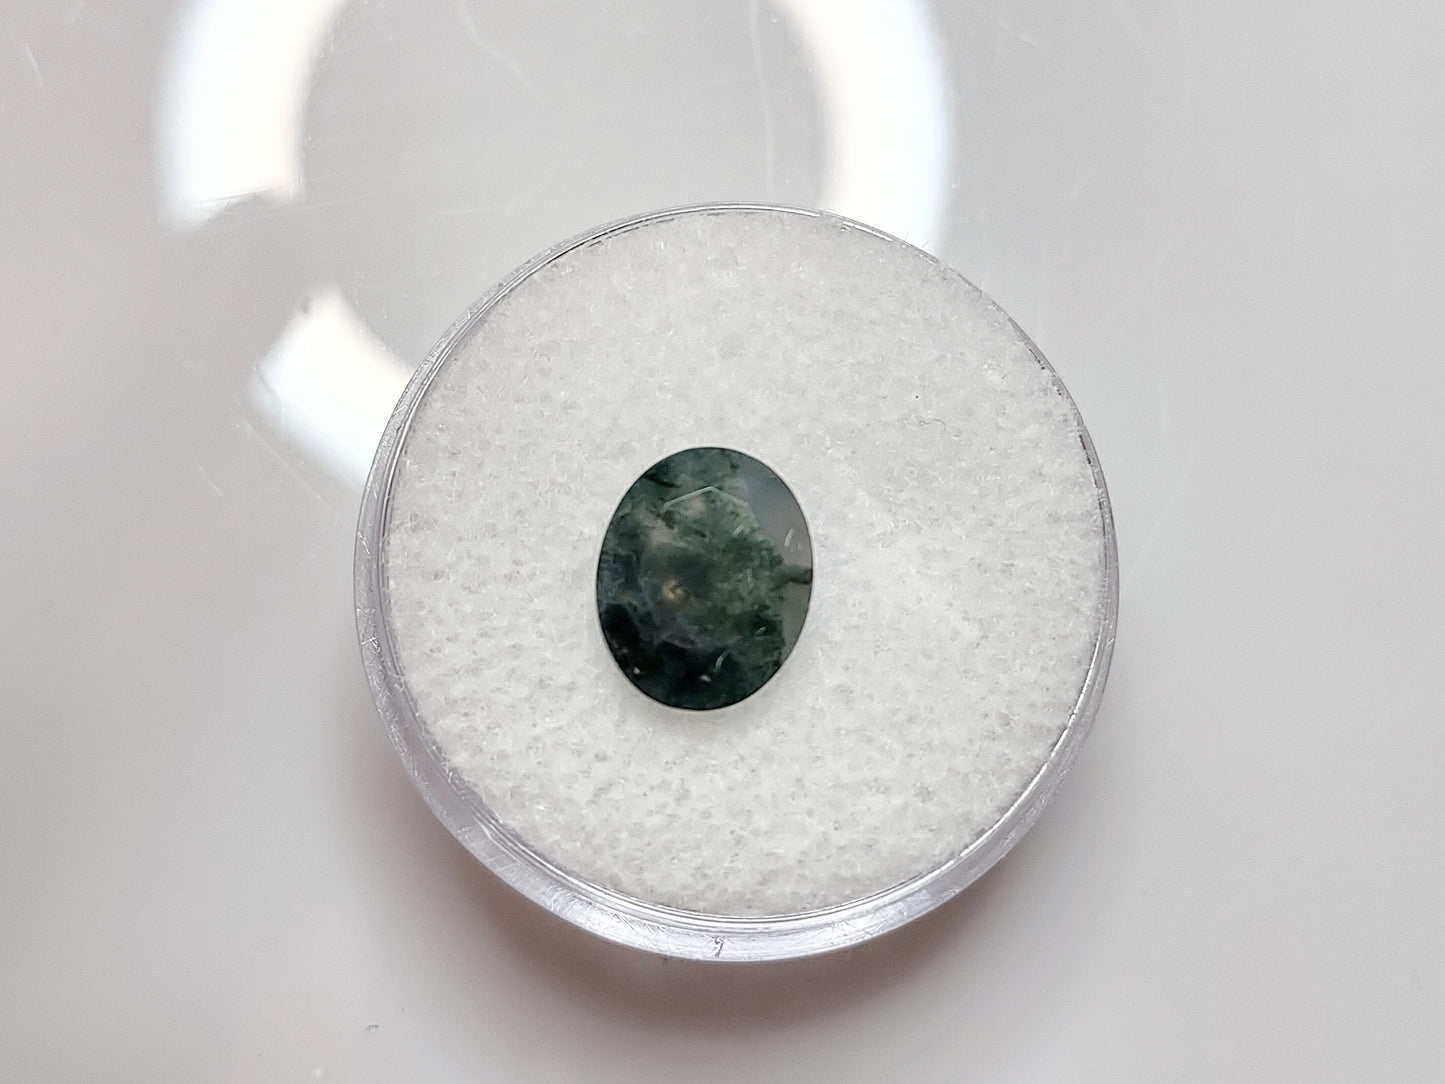 A mostly green colored oval cut moss agate.